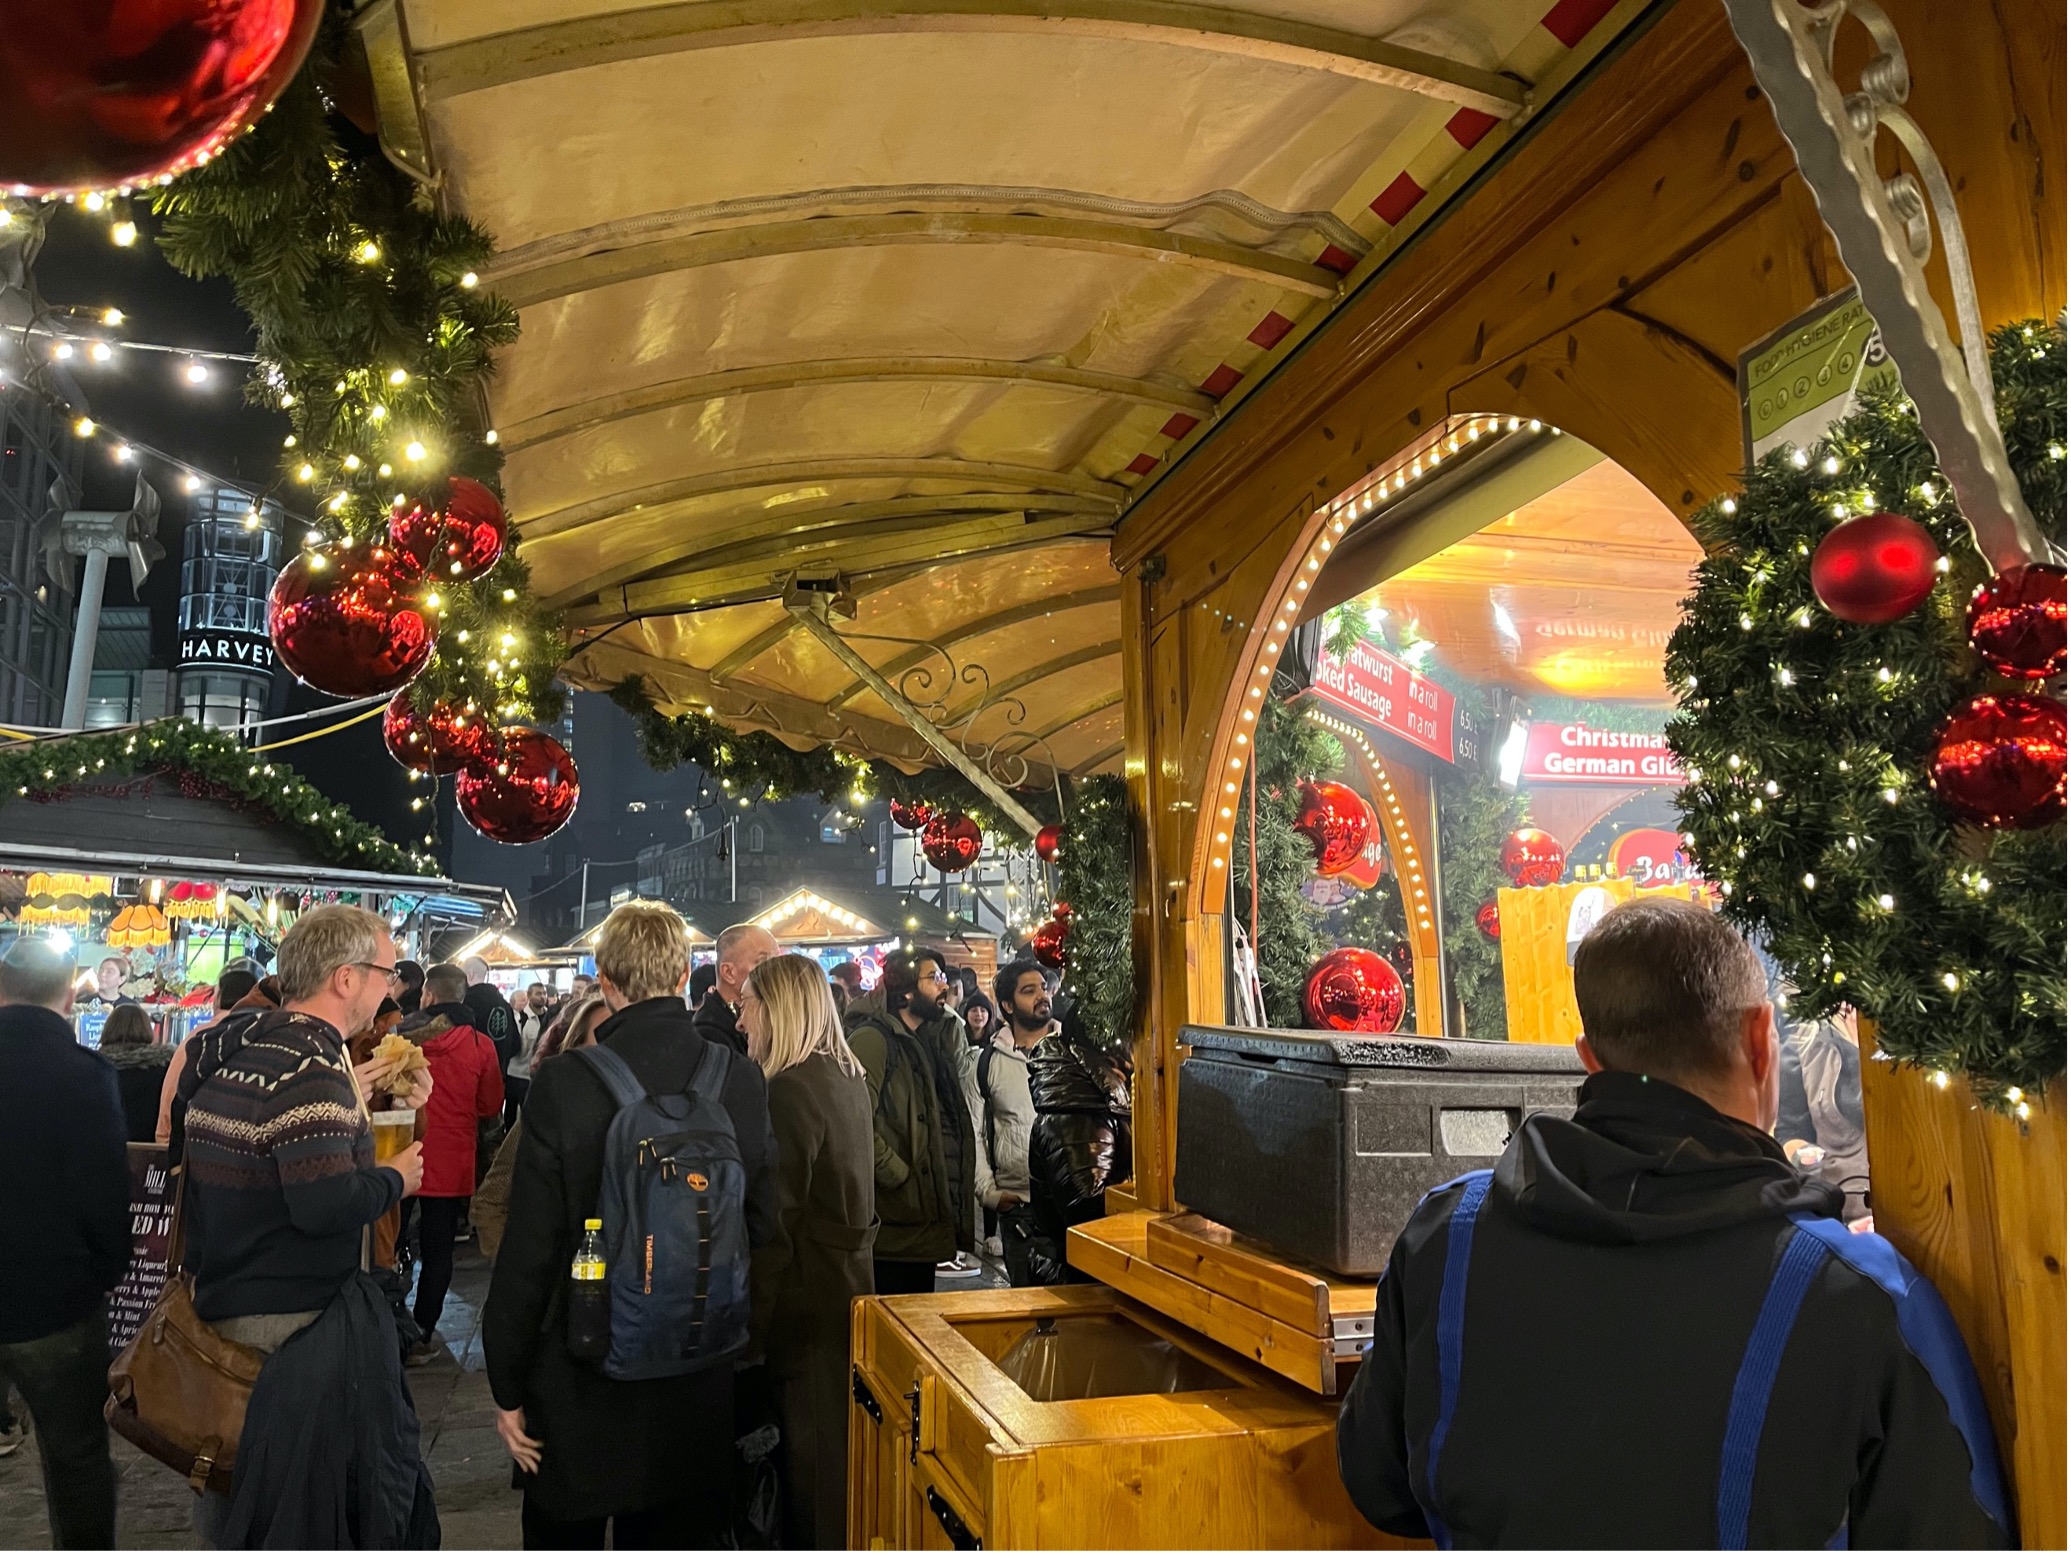 Food and drinks being sold at Manchester Christmas Markets